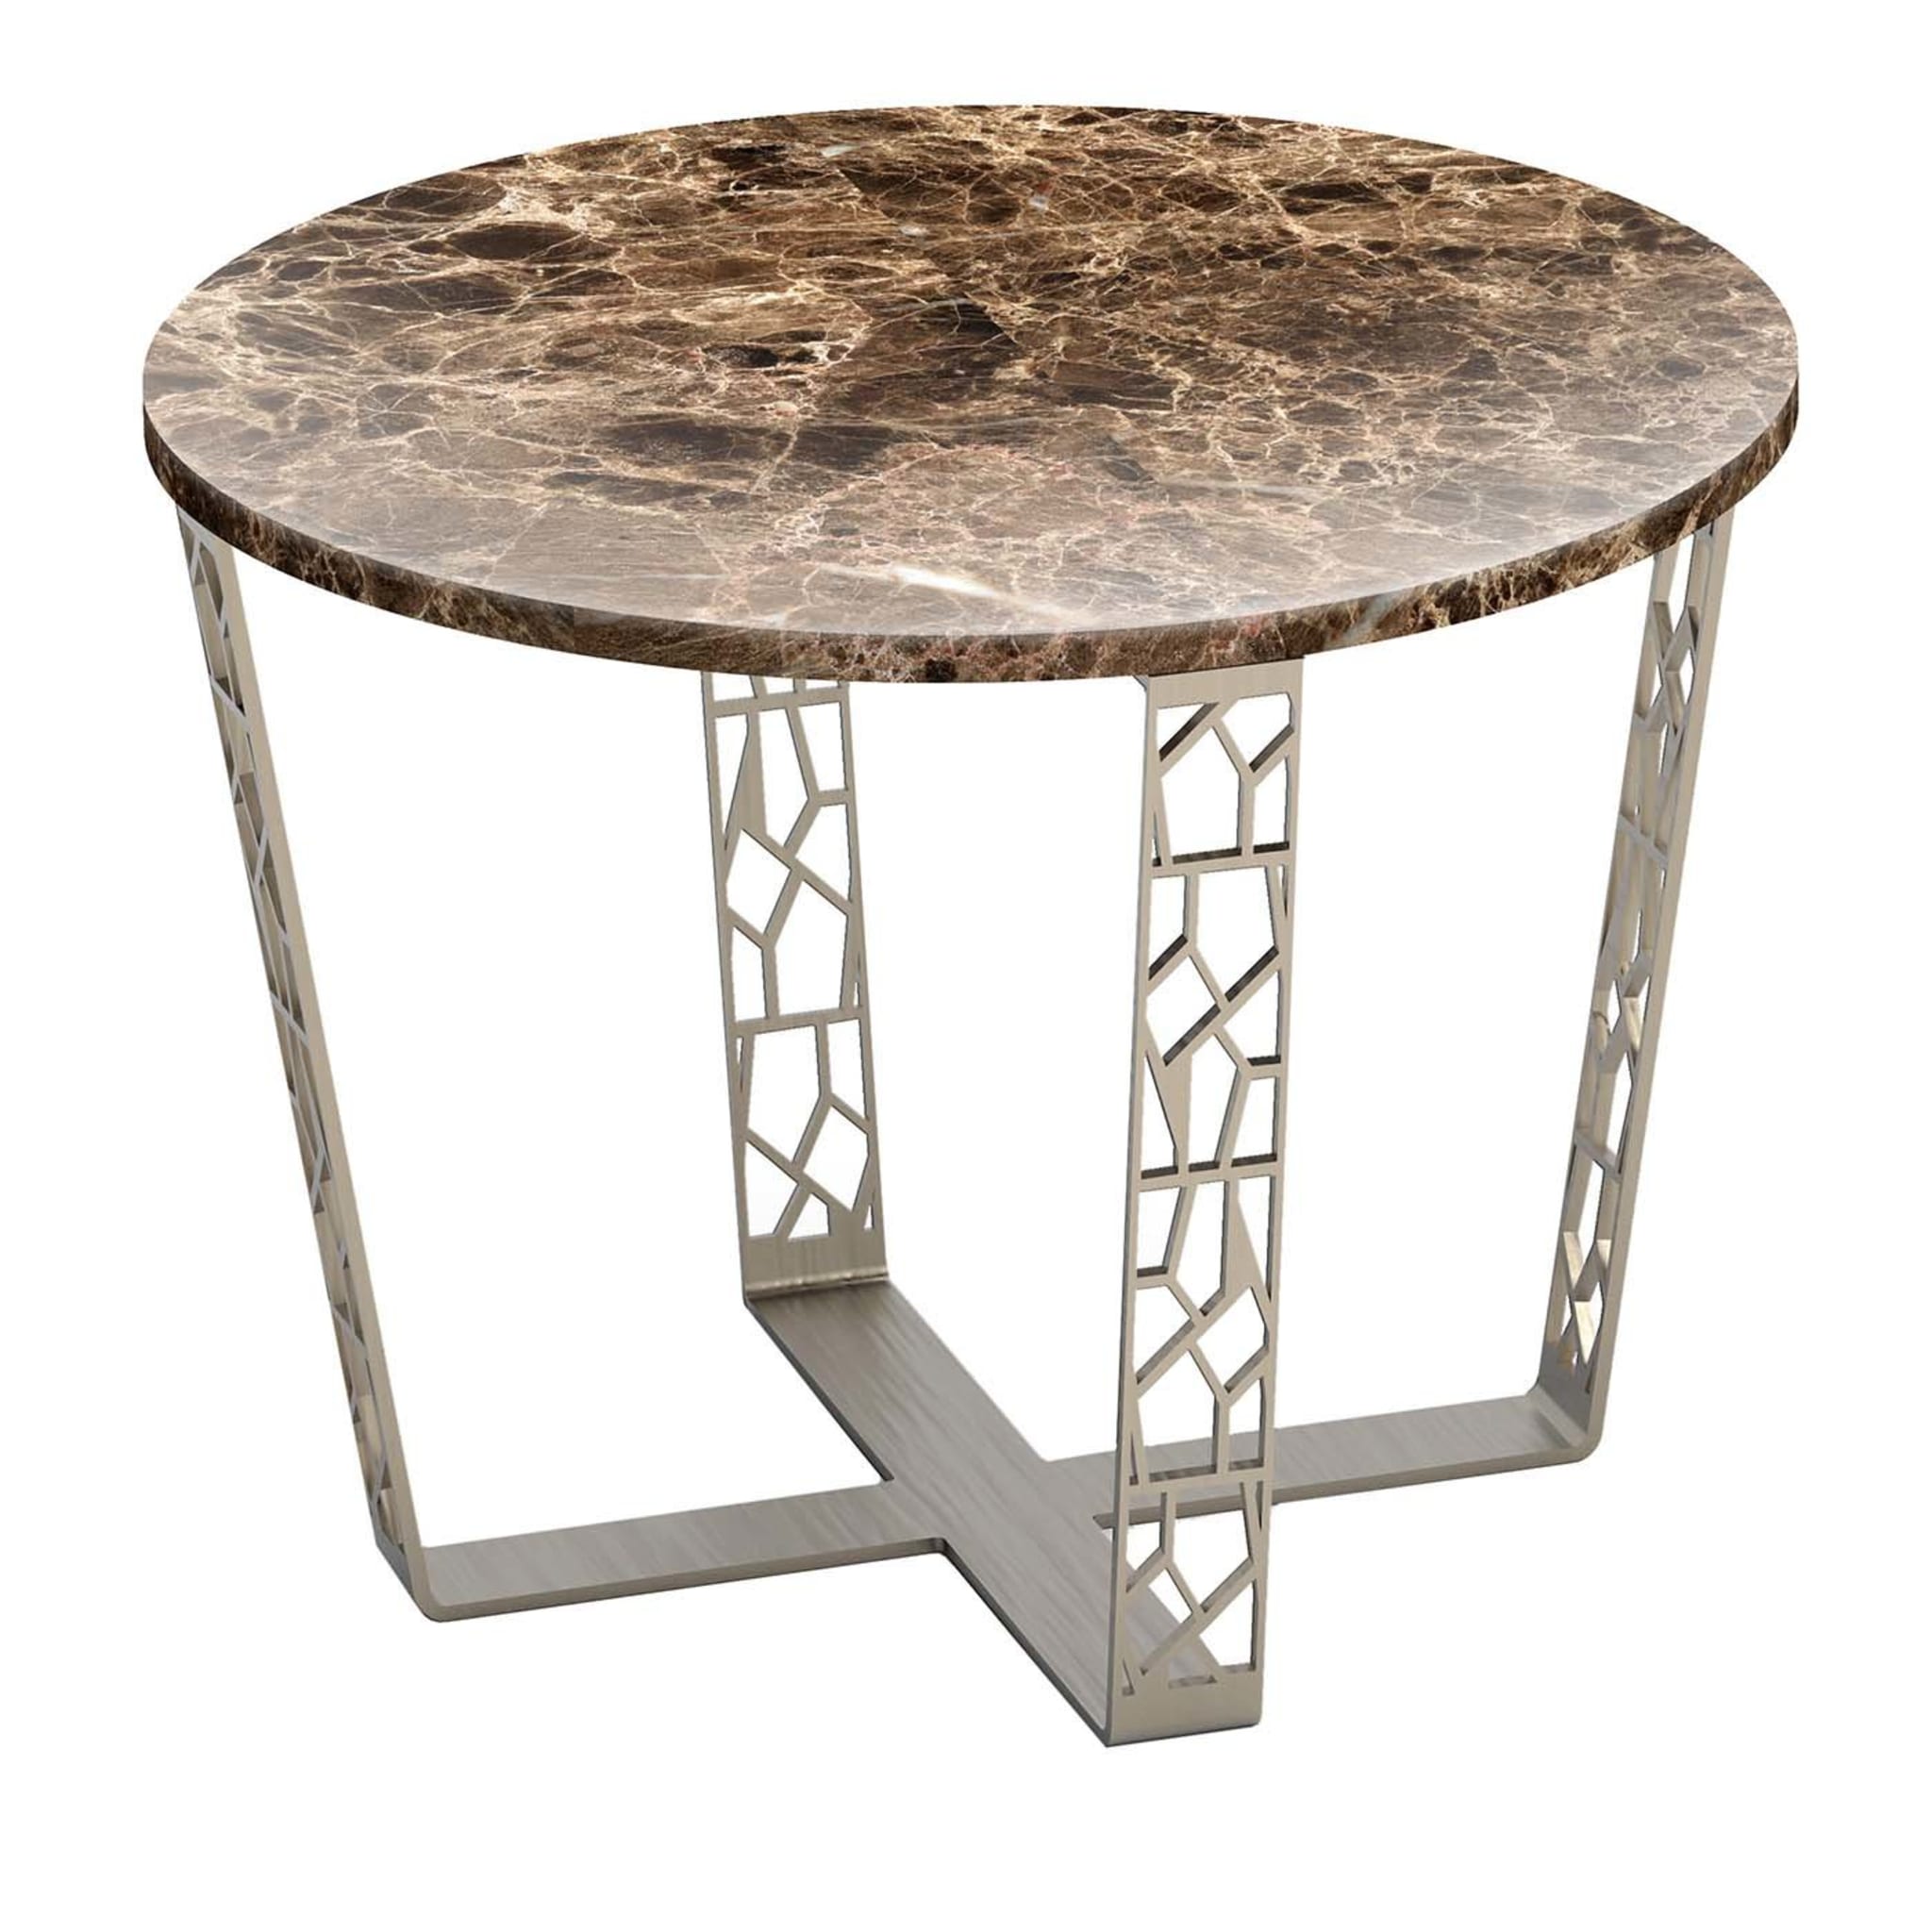 Arabesque Champagne Coffee Table - Main view